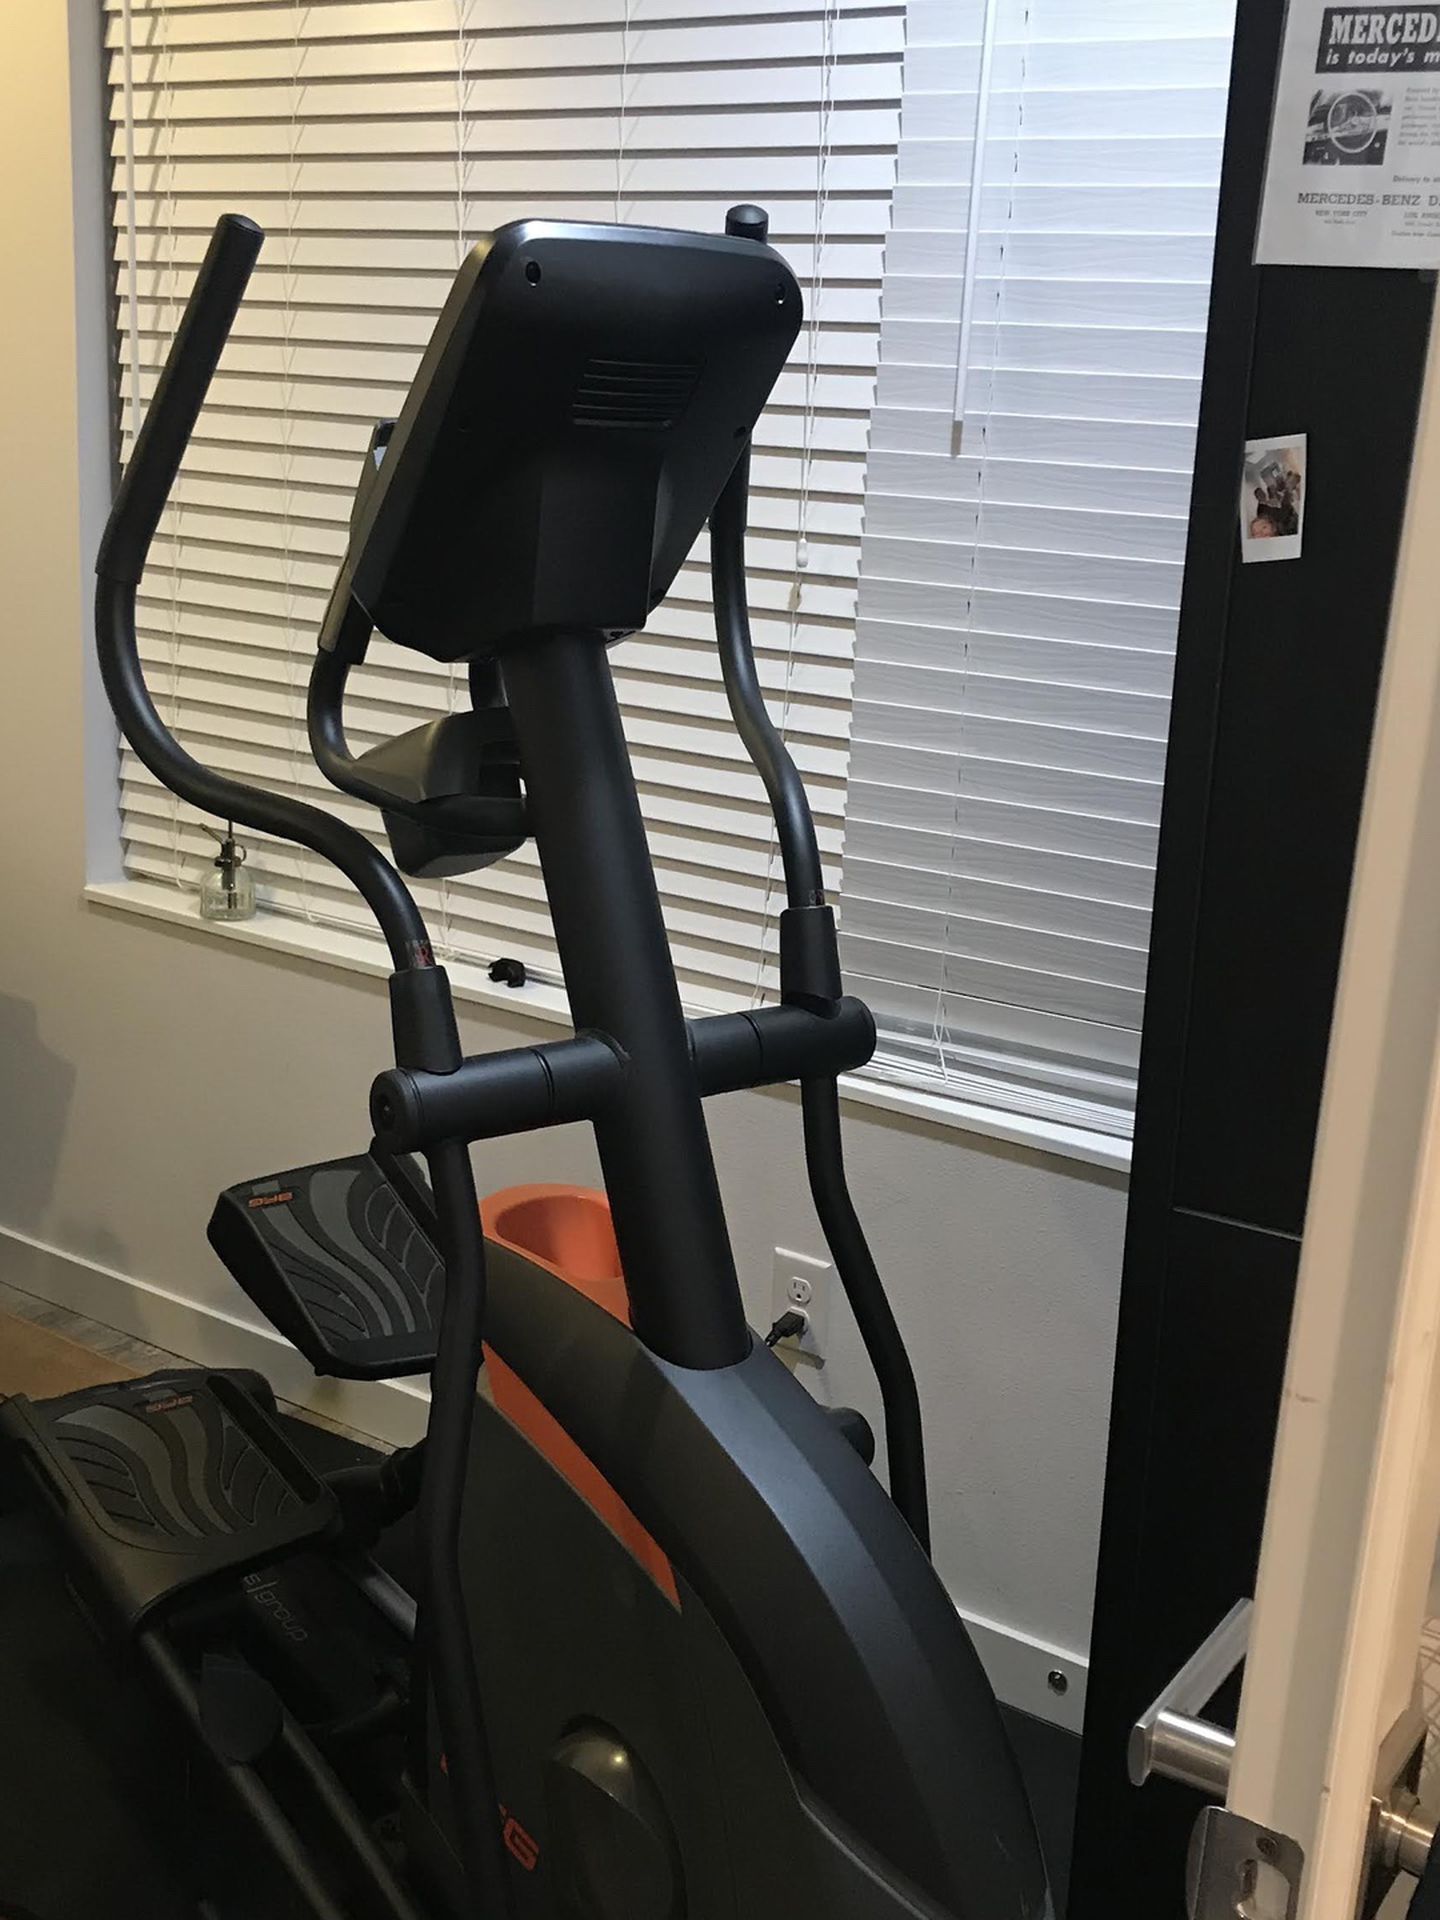 Gently Used Elliptical For The Home